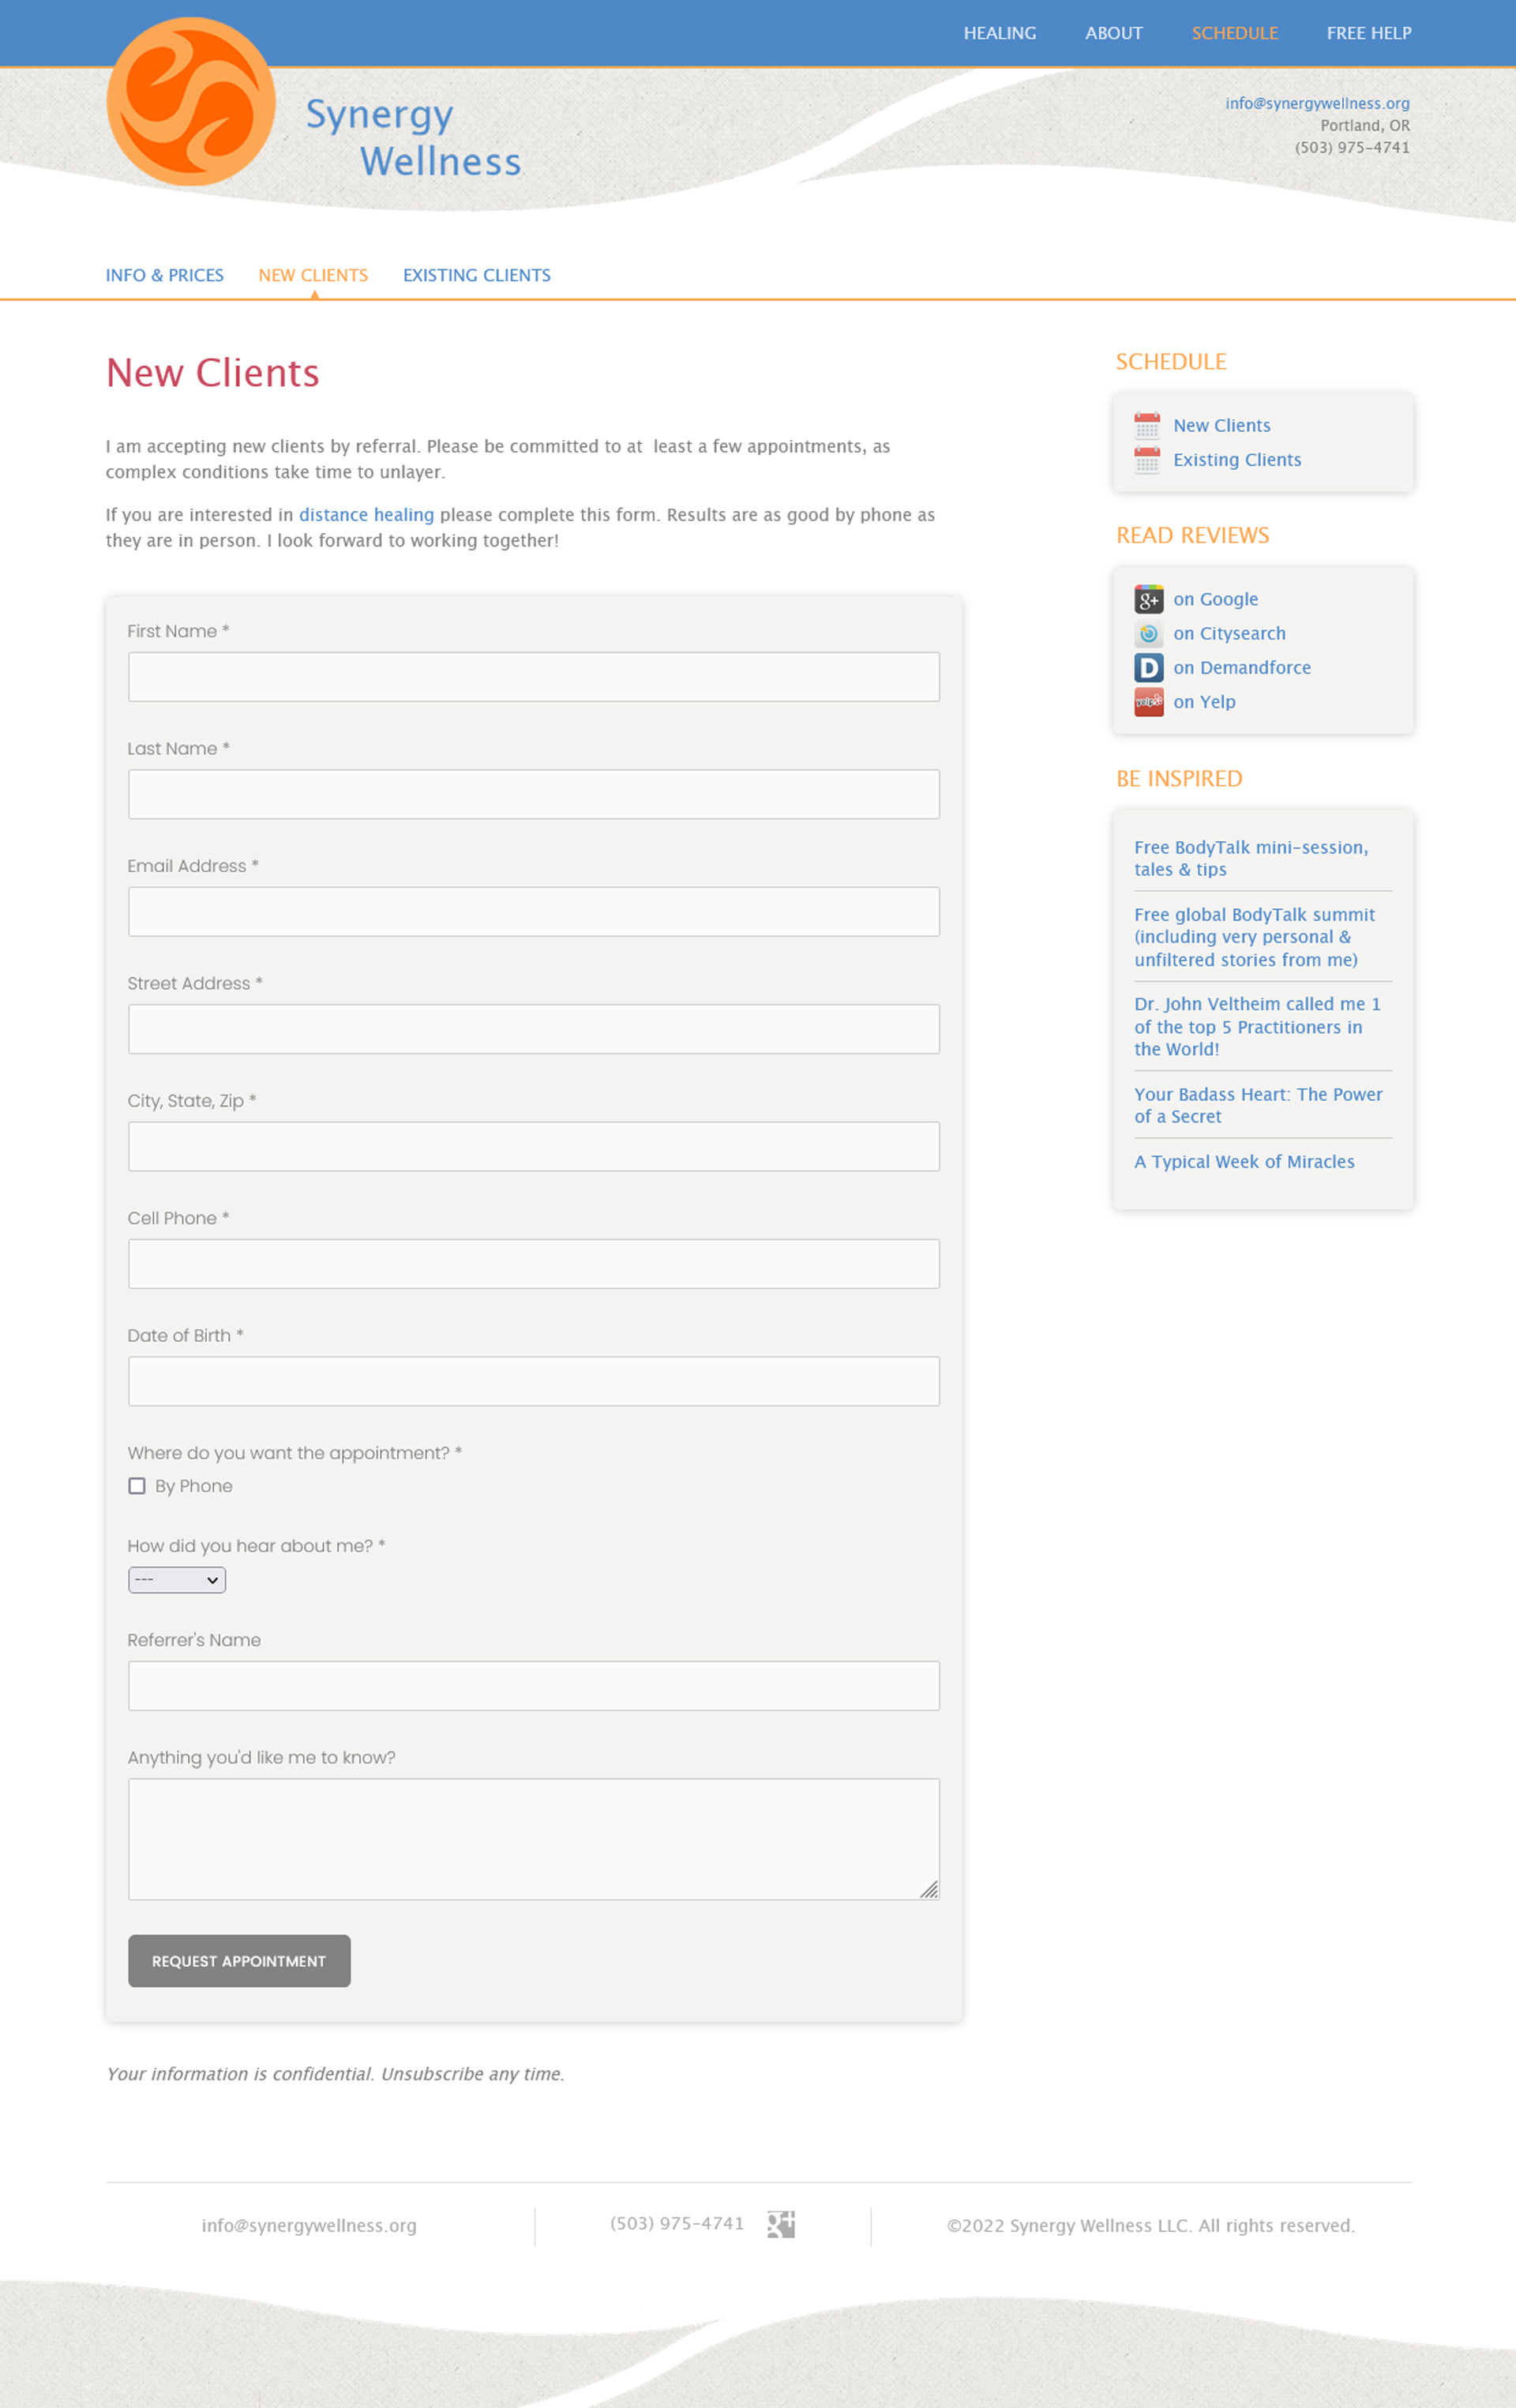 A full page screenshot of the websites custom form.